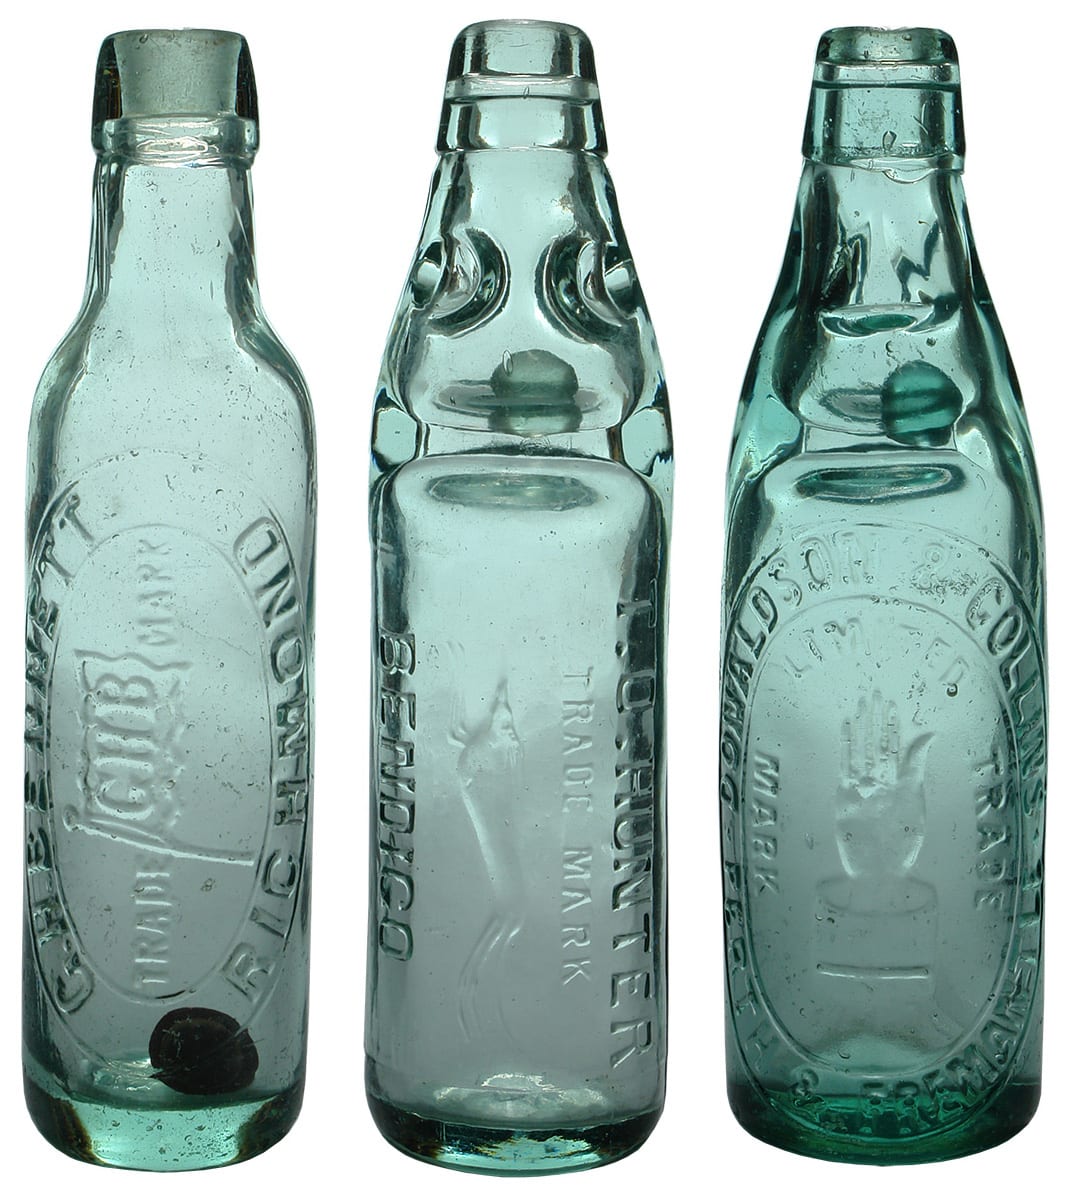 Collection Aerated Water Old Bottles